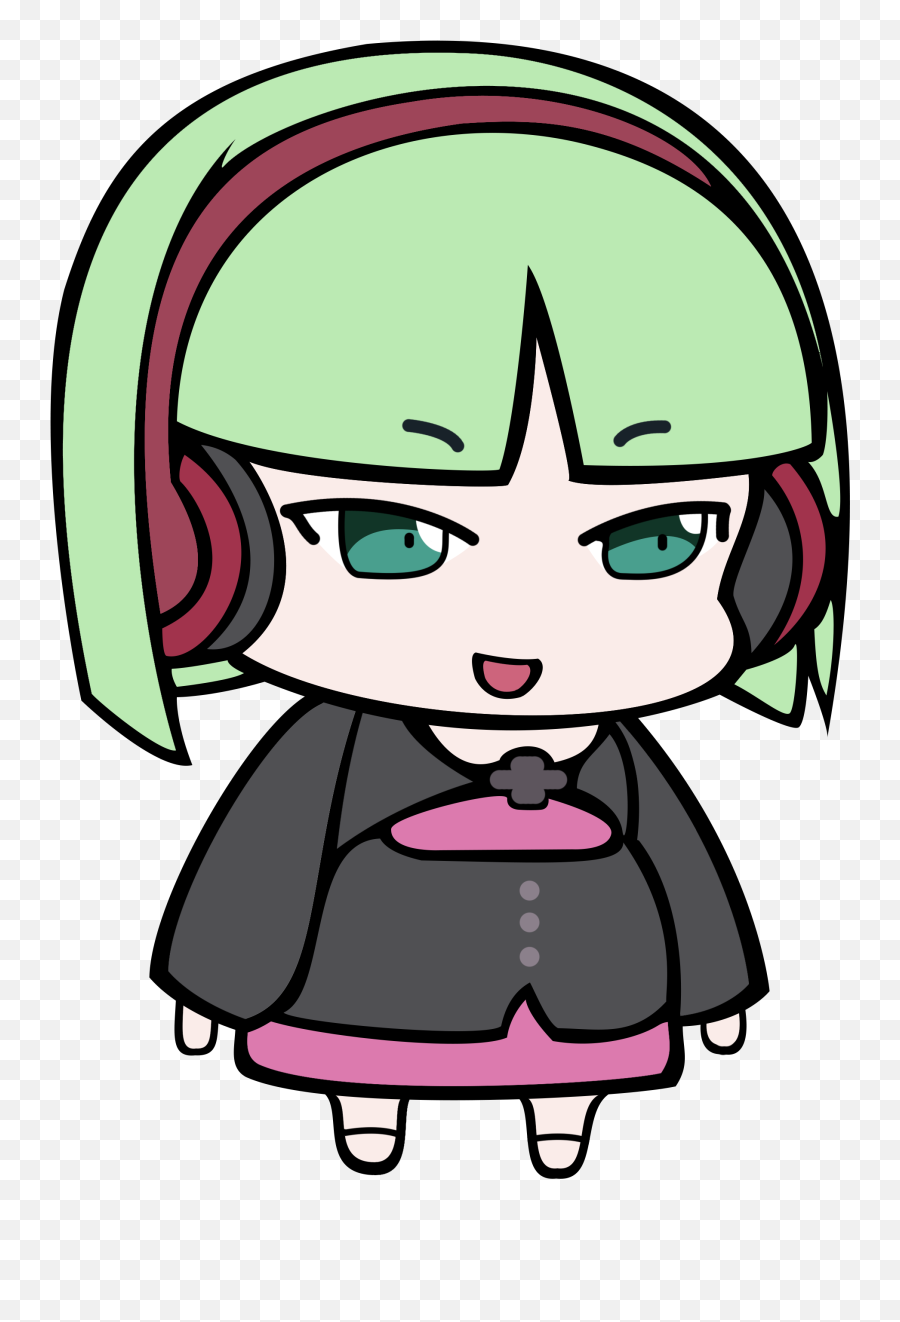 Fanart Musicphonon Chibi More Poses And Faces Png Cute - Under Night In Birth Chibi,Png Faces